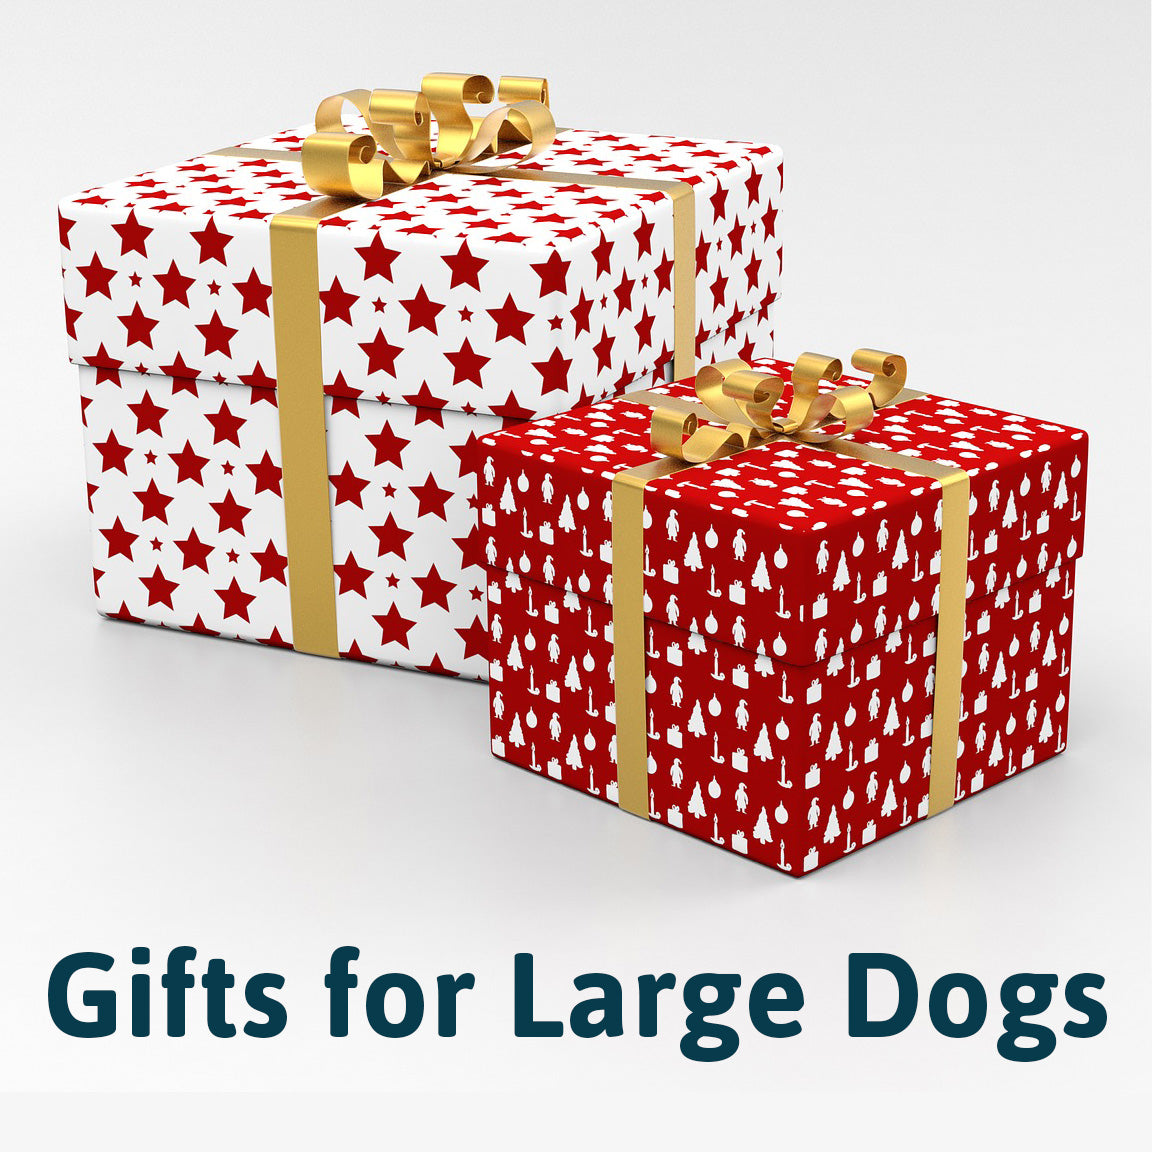 Holiday Gift Guide for Pets: Large Dogs